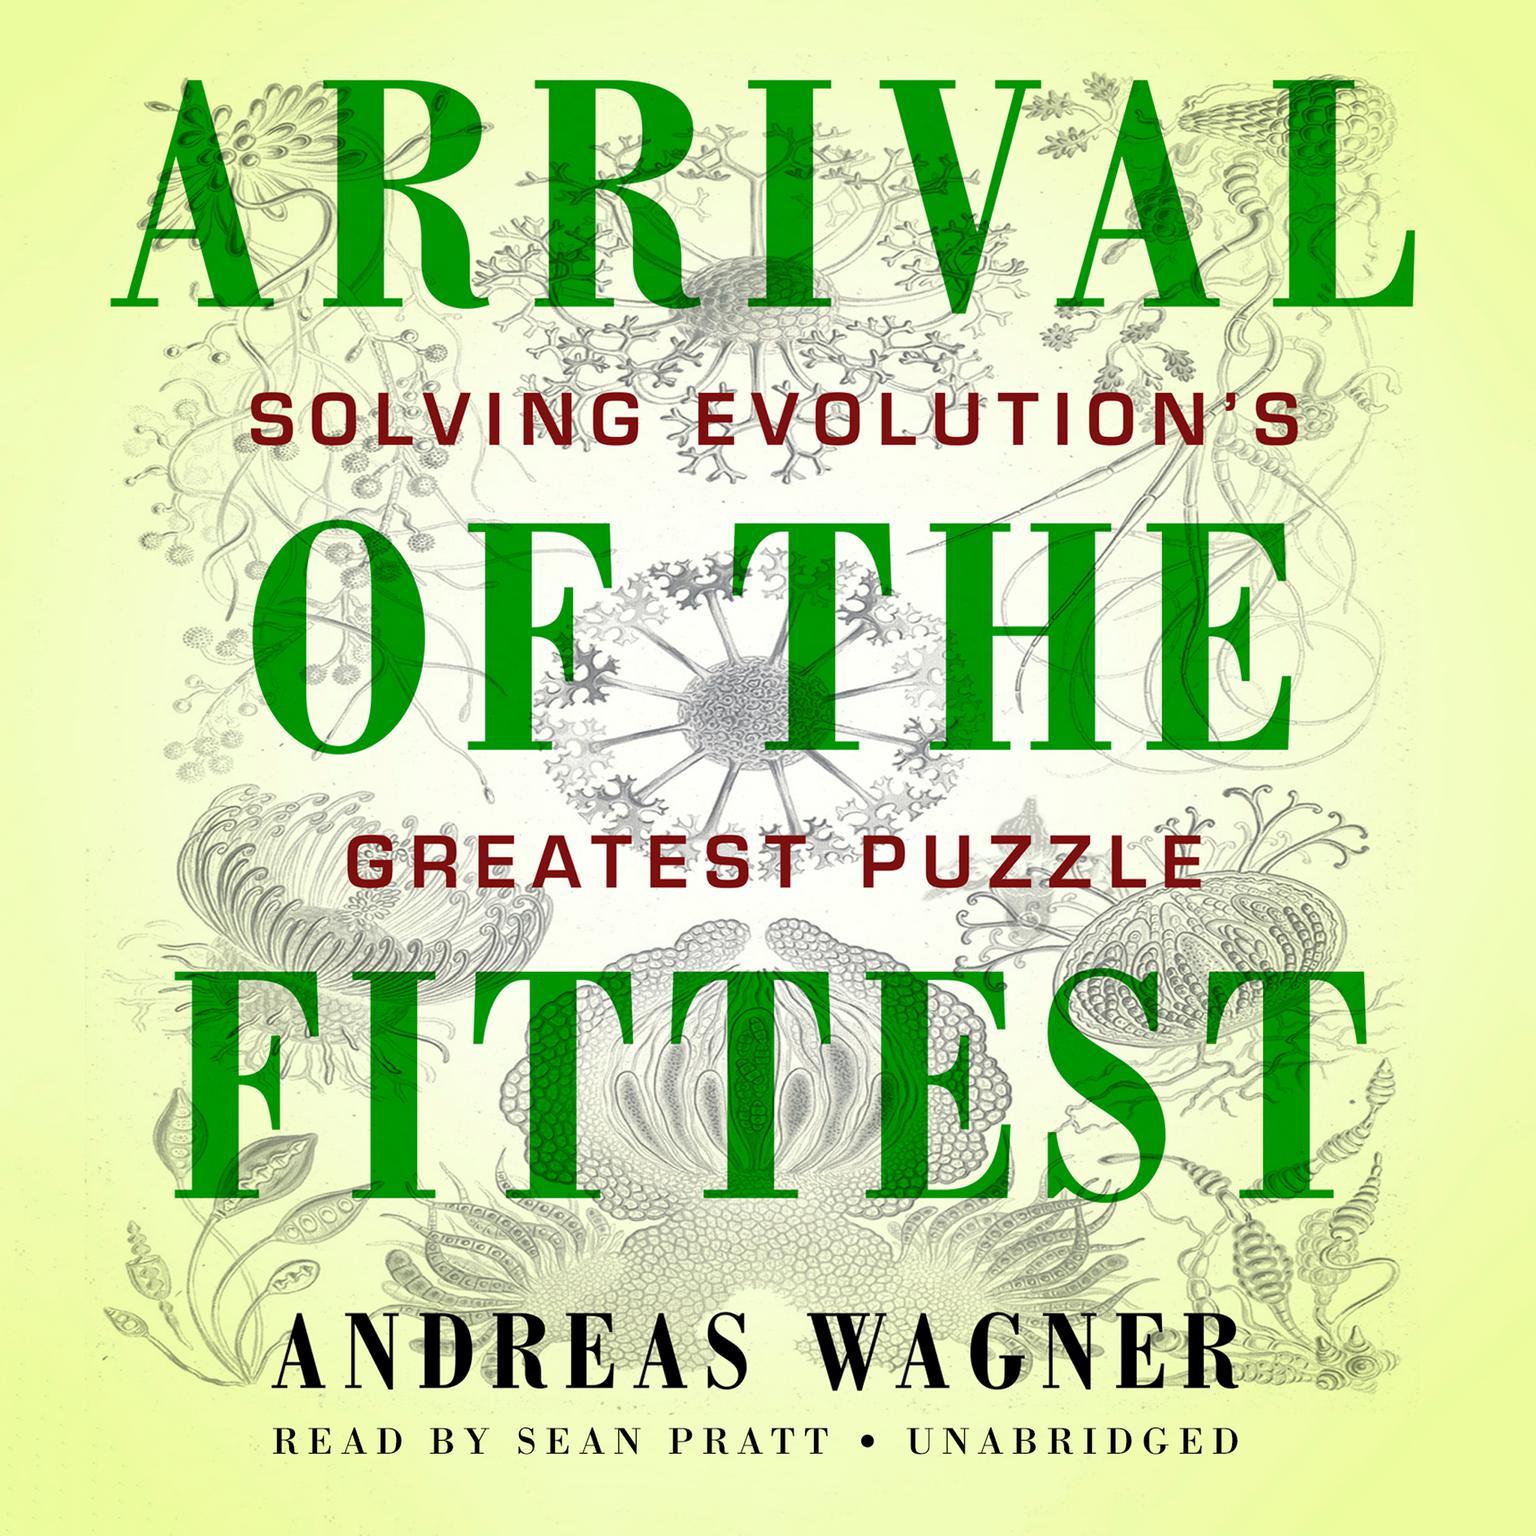 Arrival the Fittest: Solving Evolutions Greatest Puzzle Audiobook, by Andreas Wagner